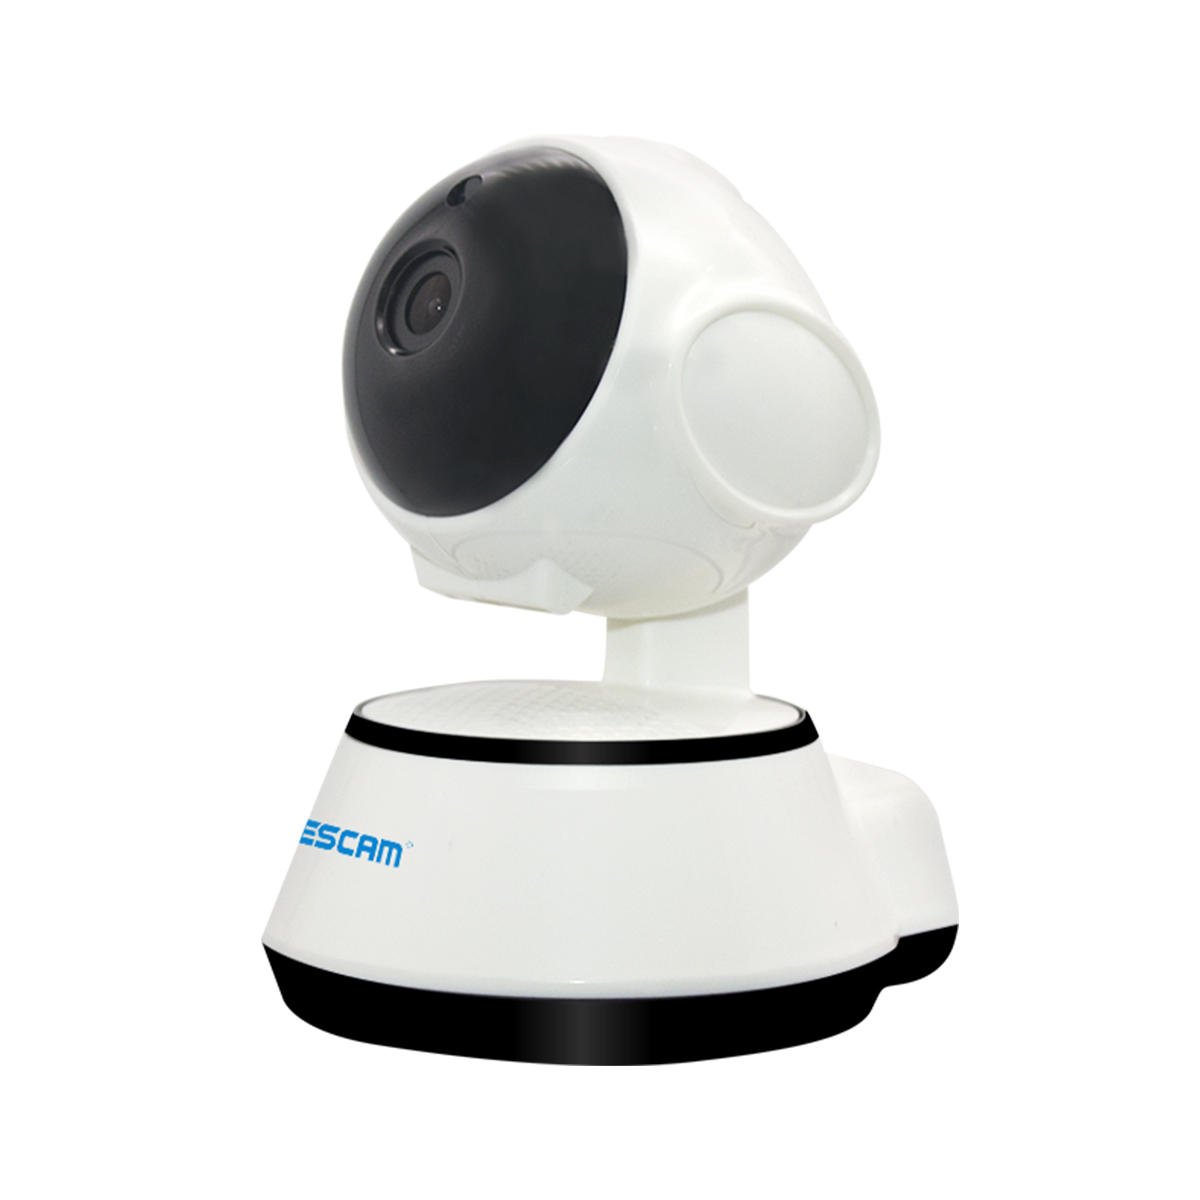 ESCAM G10 720P IP Wireless Camera Support M otion Detection H.264 Pan/Tilt Support 64G TF Card IR Cam